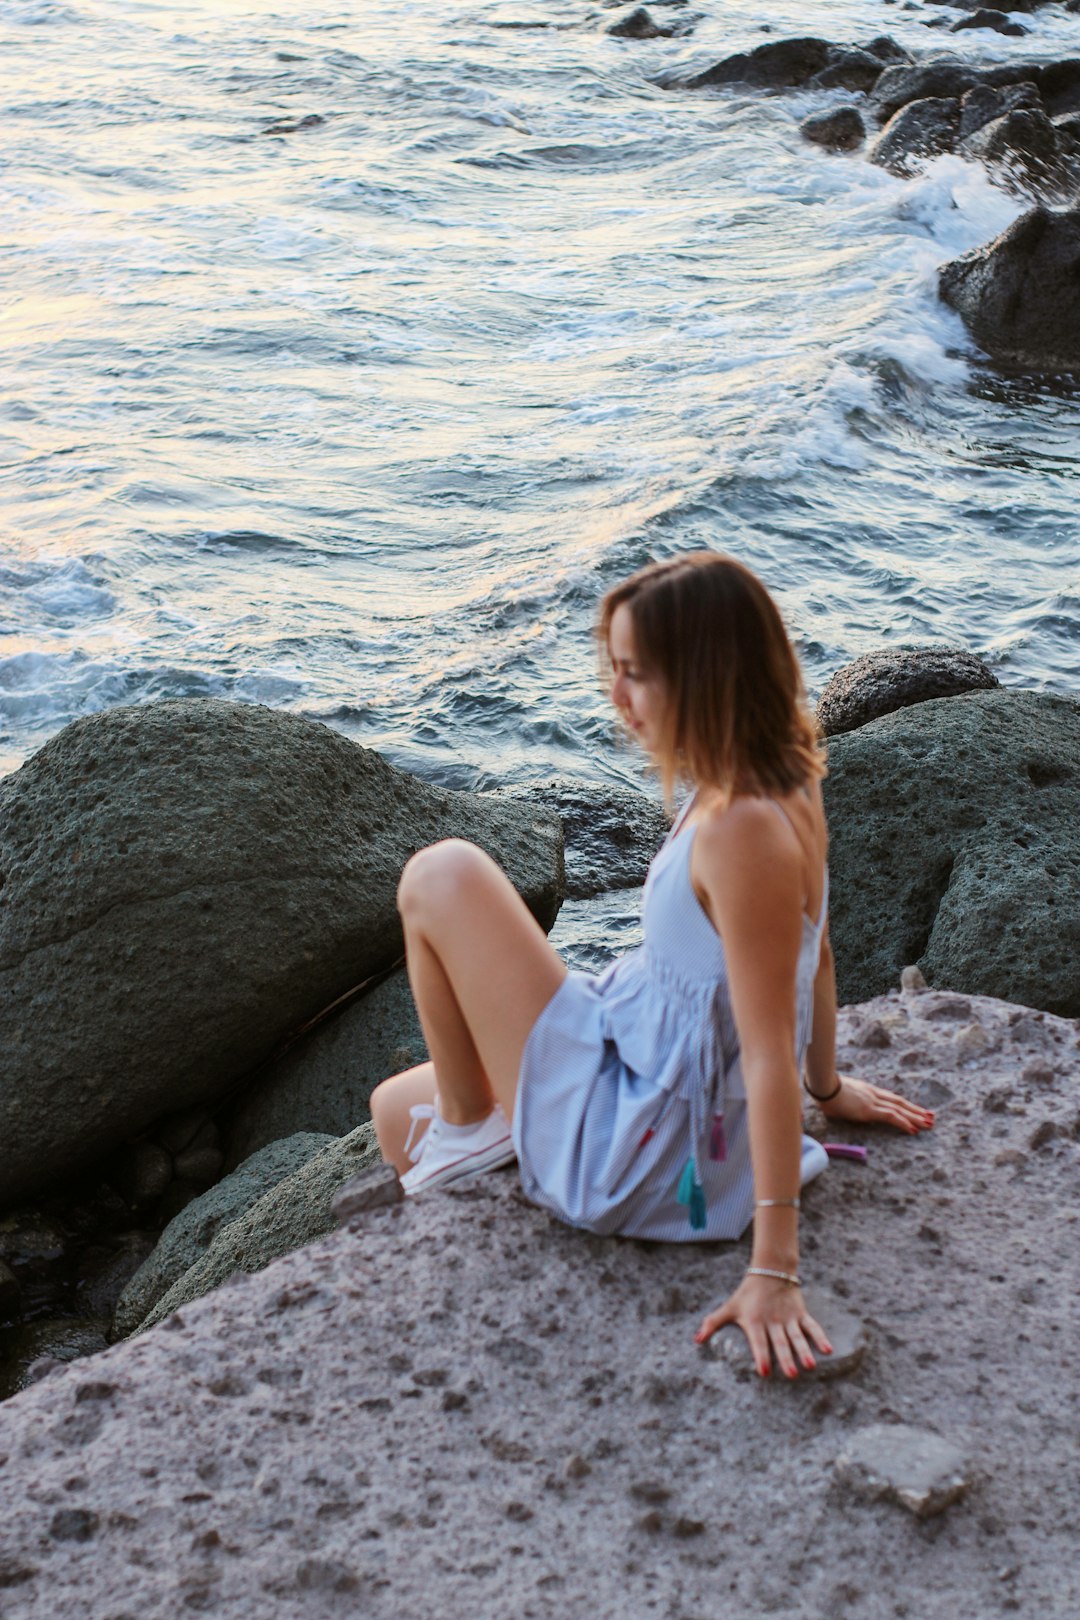 woman in white dress sitting on rock near body of water during daytime